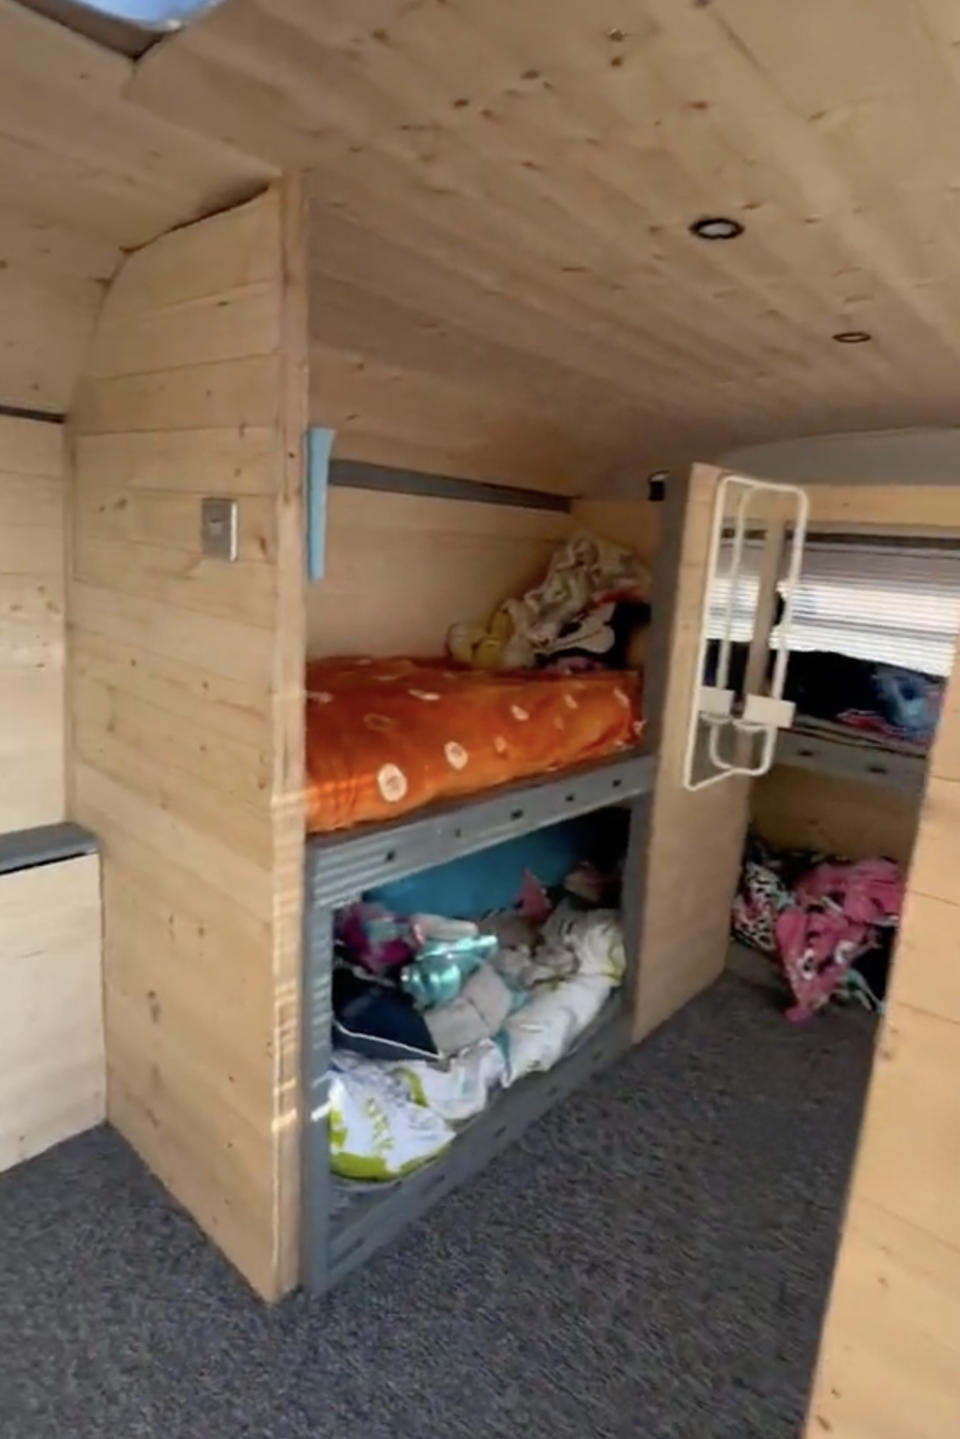 A set of children's bunk beds on board the double decker bus. (SWNS)